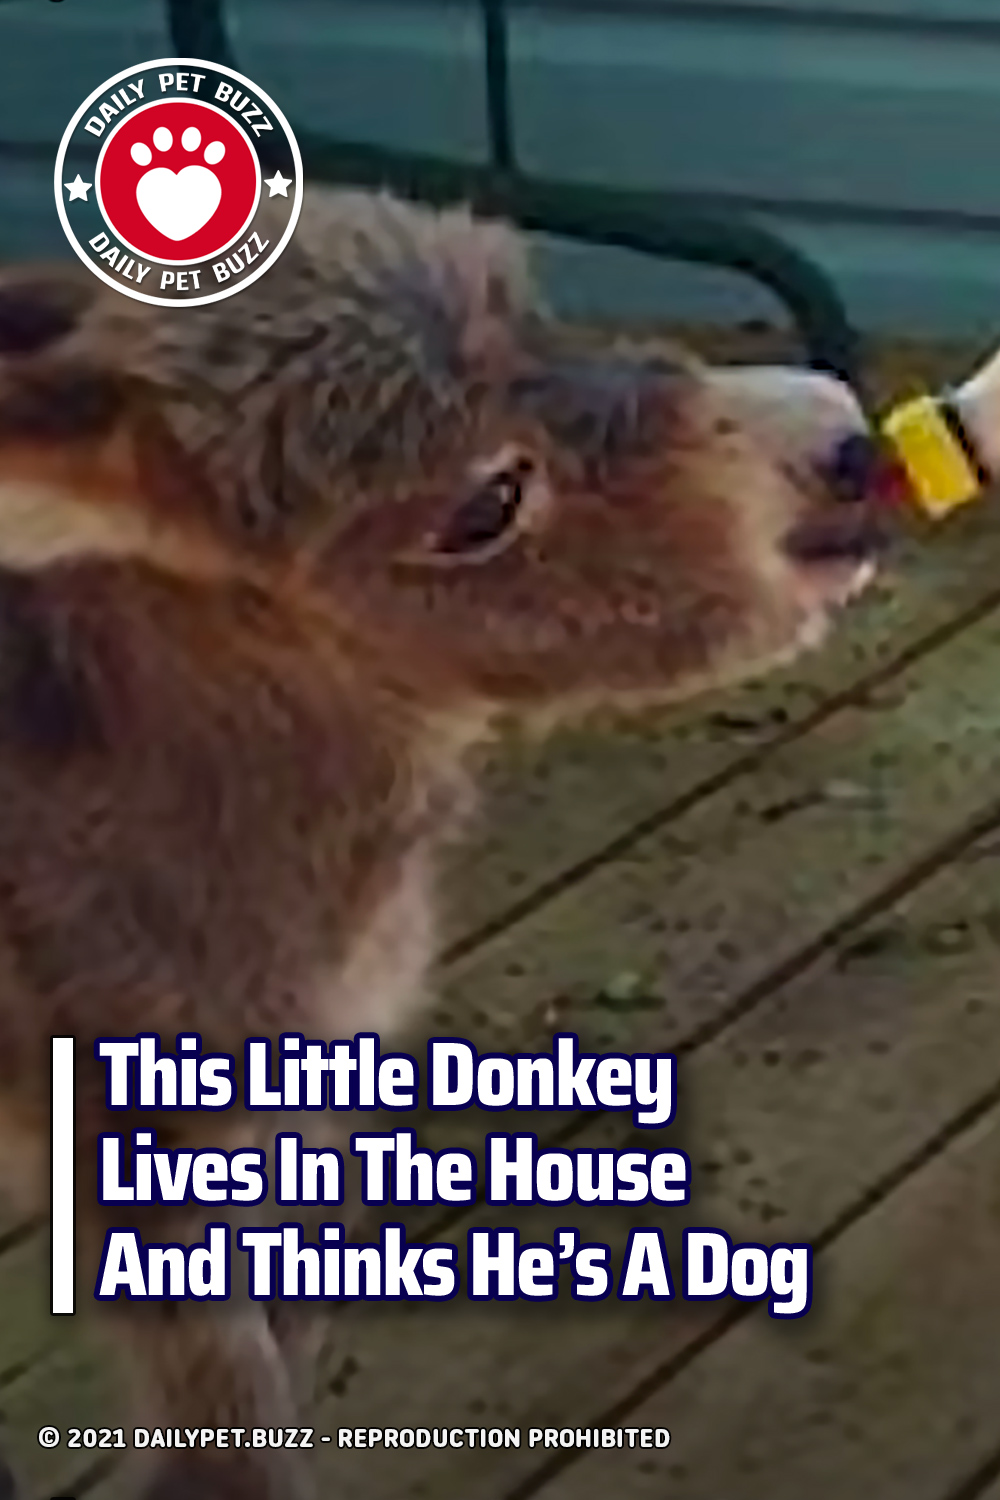 This Little Donkey Lives In The House And Thinks He’s A Dog